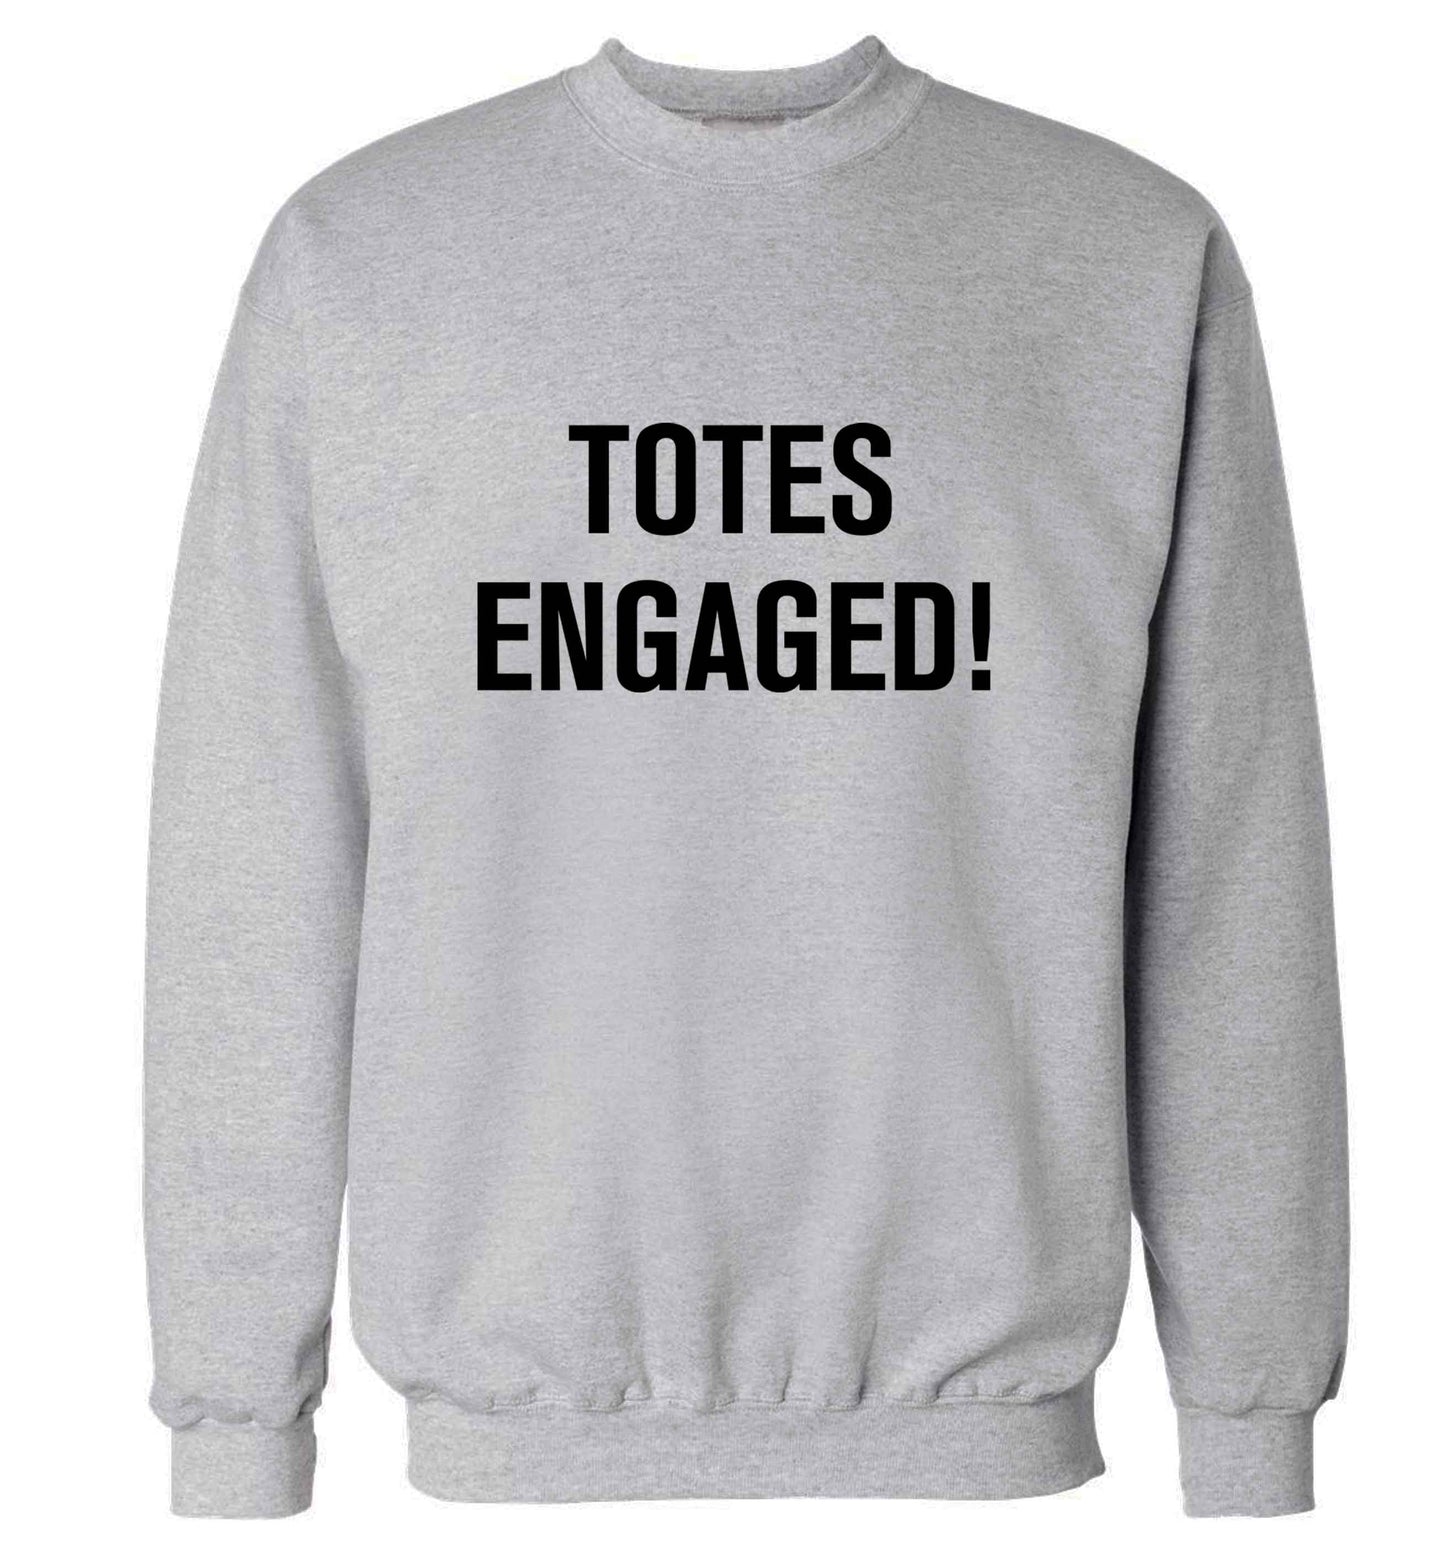 Totes engaged adult's unisex grey sweater 2XL